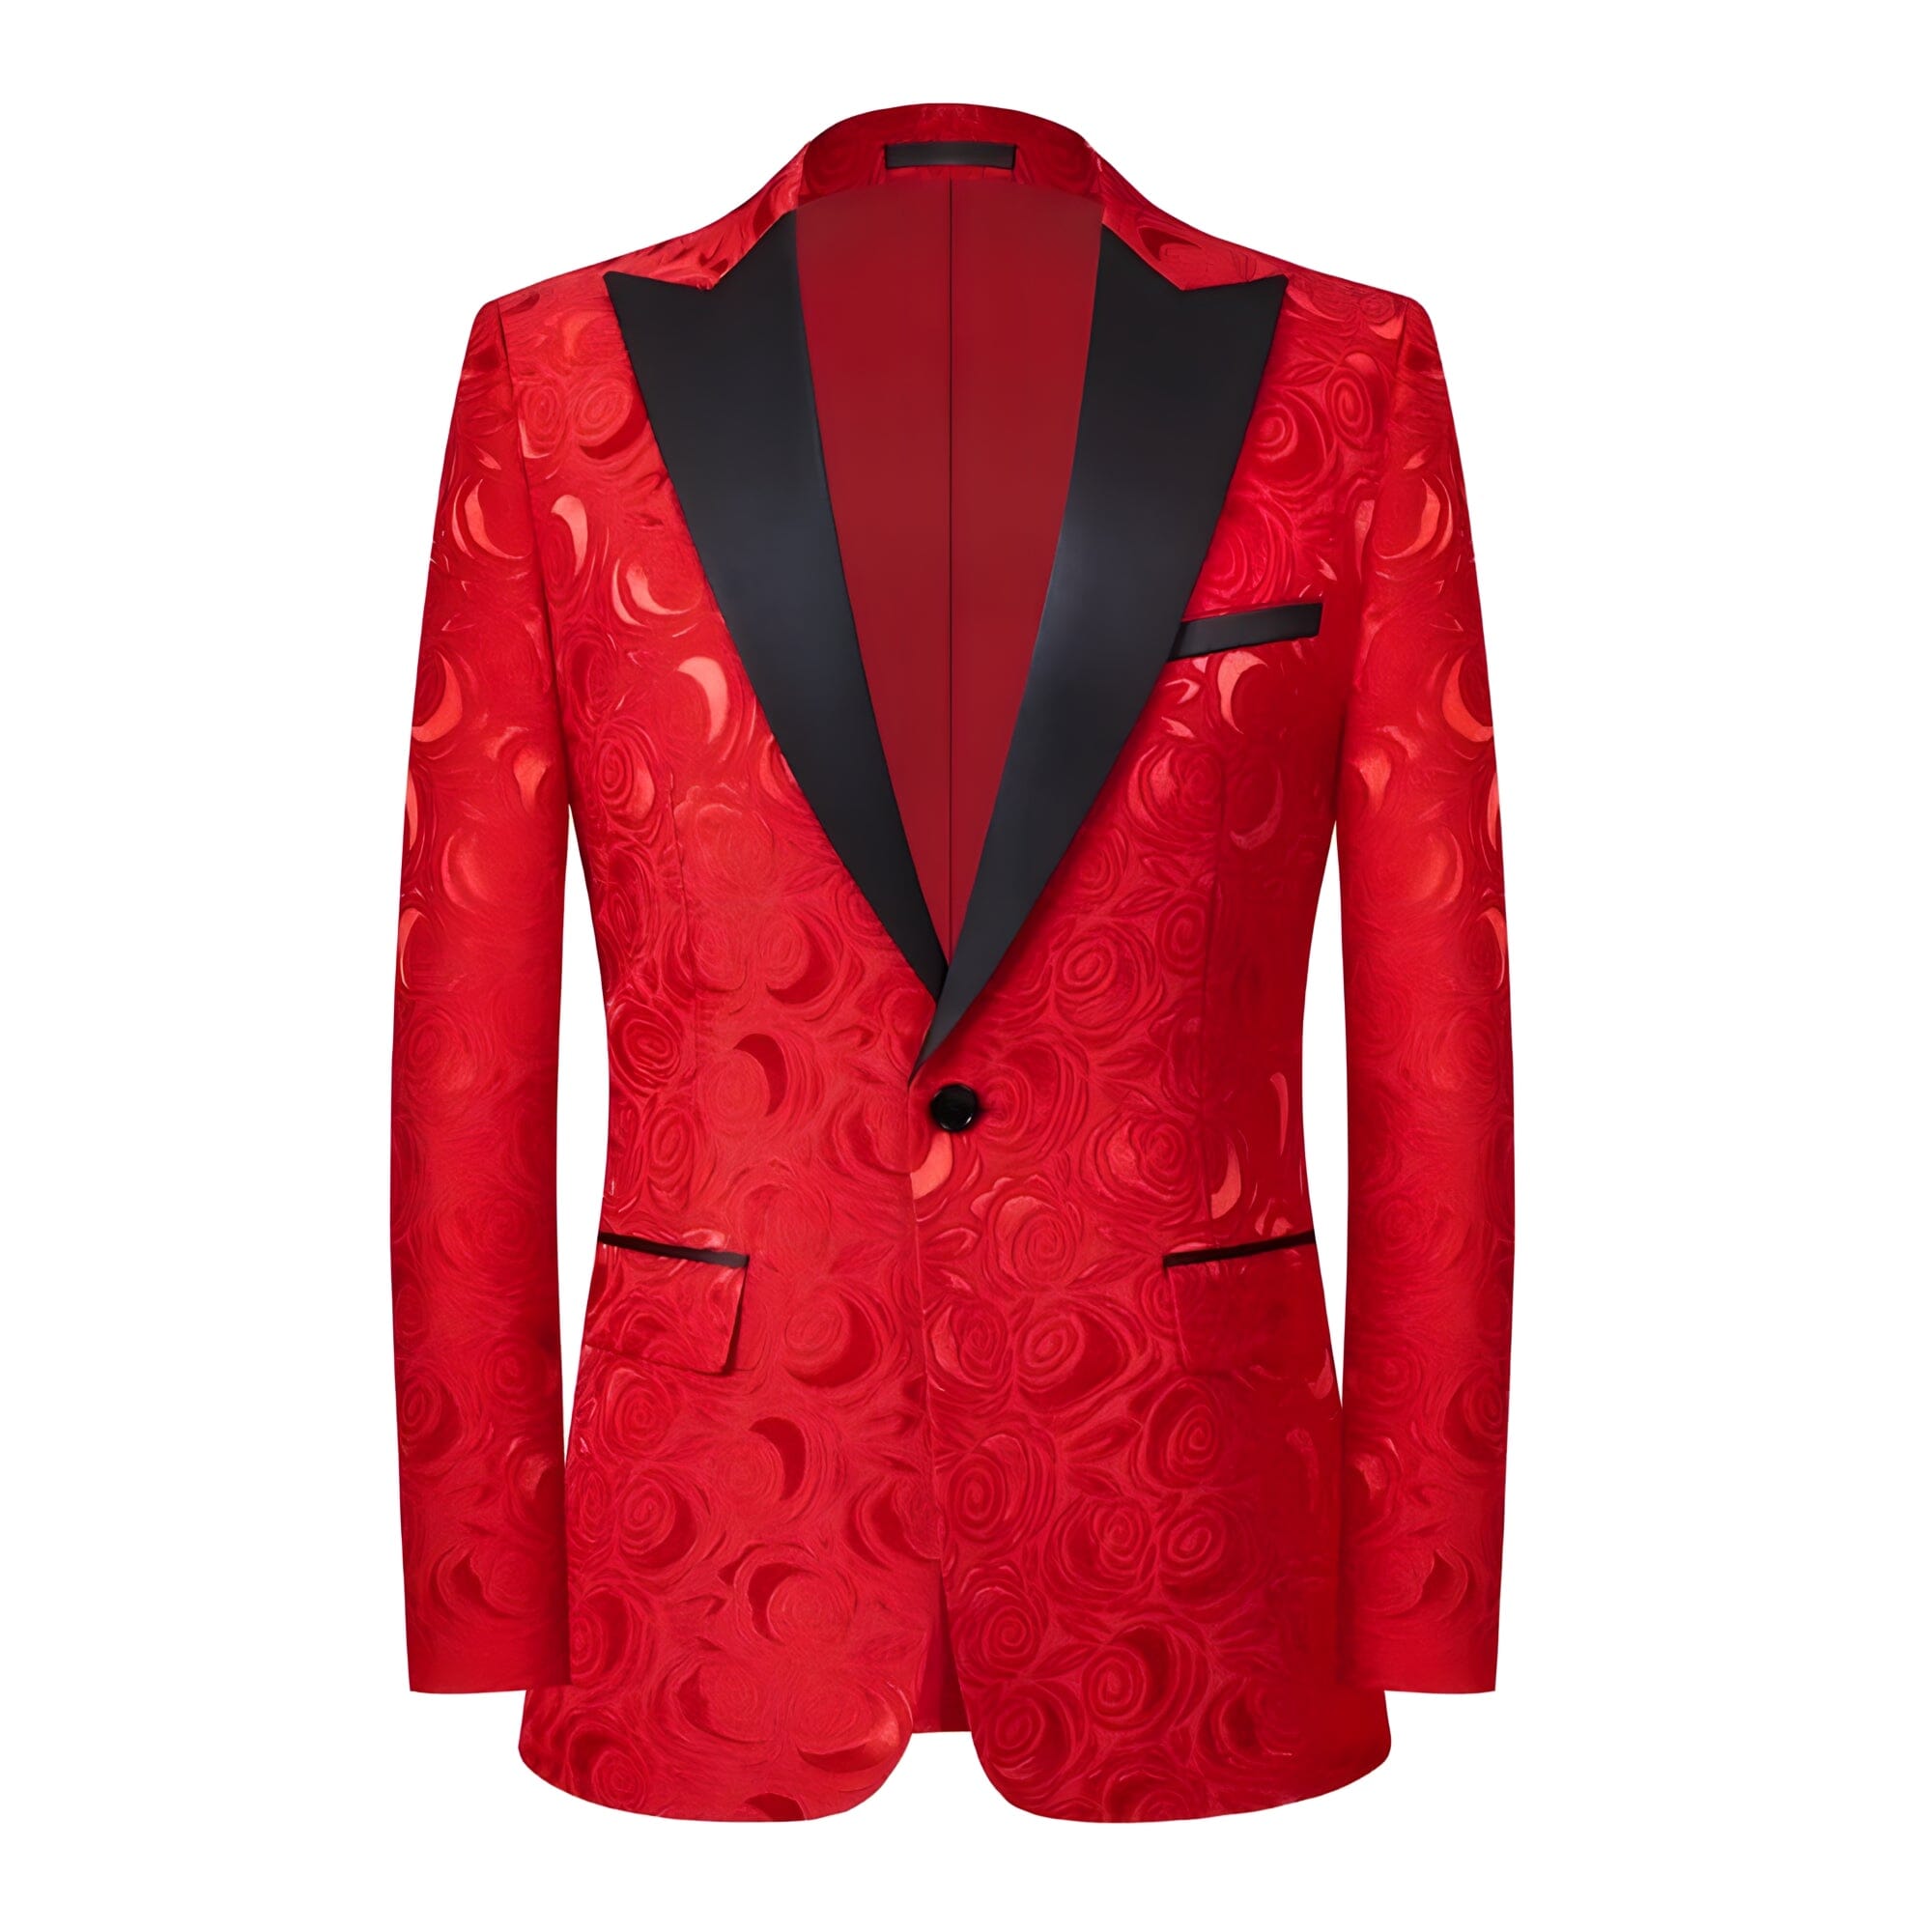 The Vance Jacquard Slim Fit Blazer Suit Jacket - Multiple Colors WD Styles Red XS 